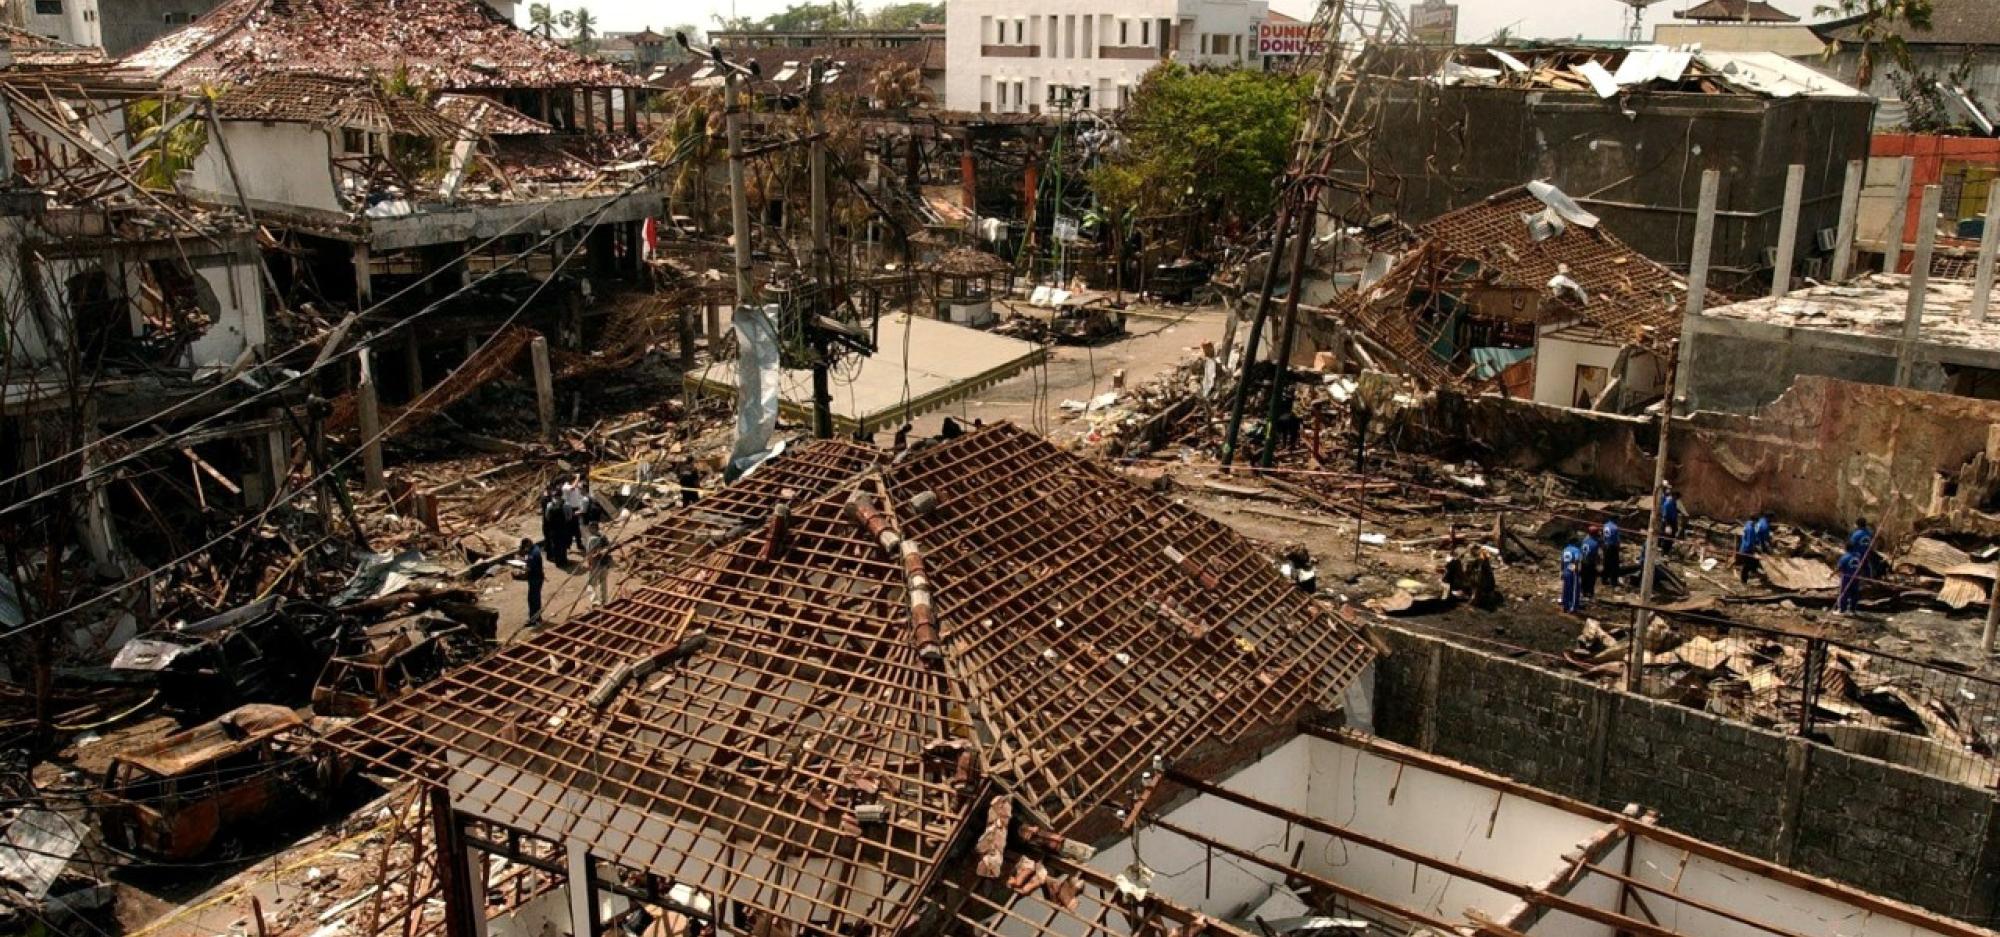 A street scene where buildings have been destroyed by a bomb